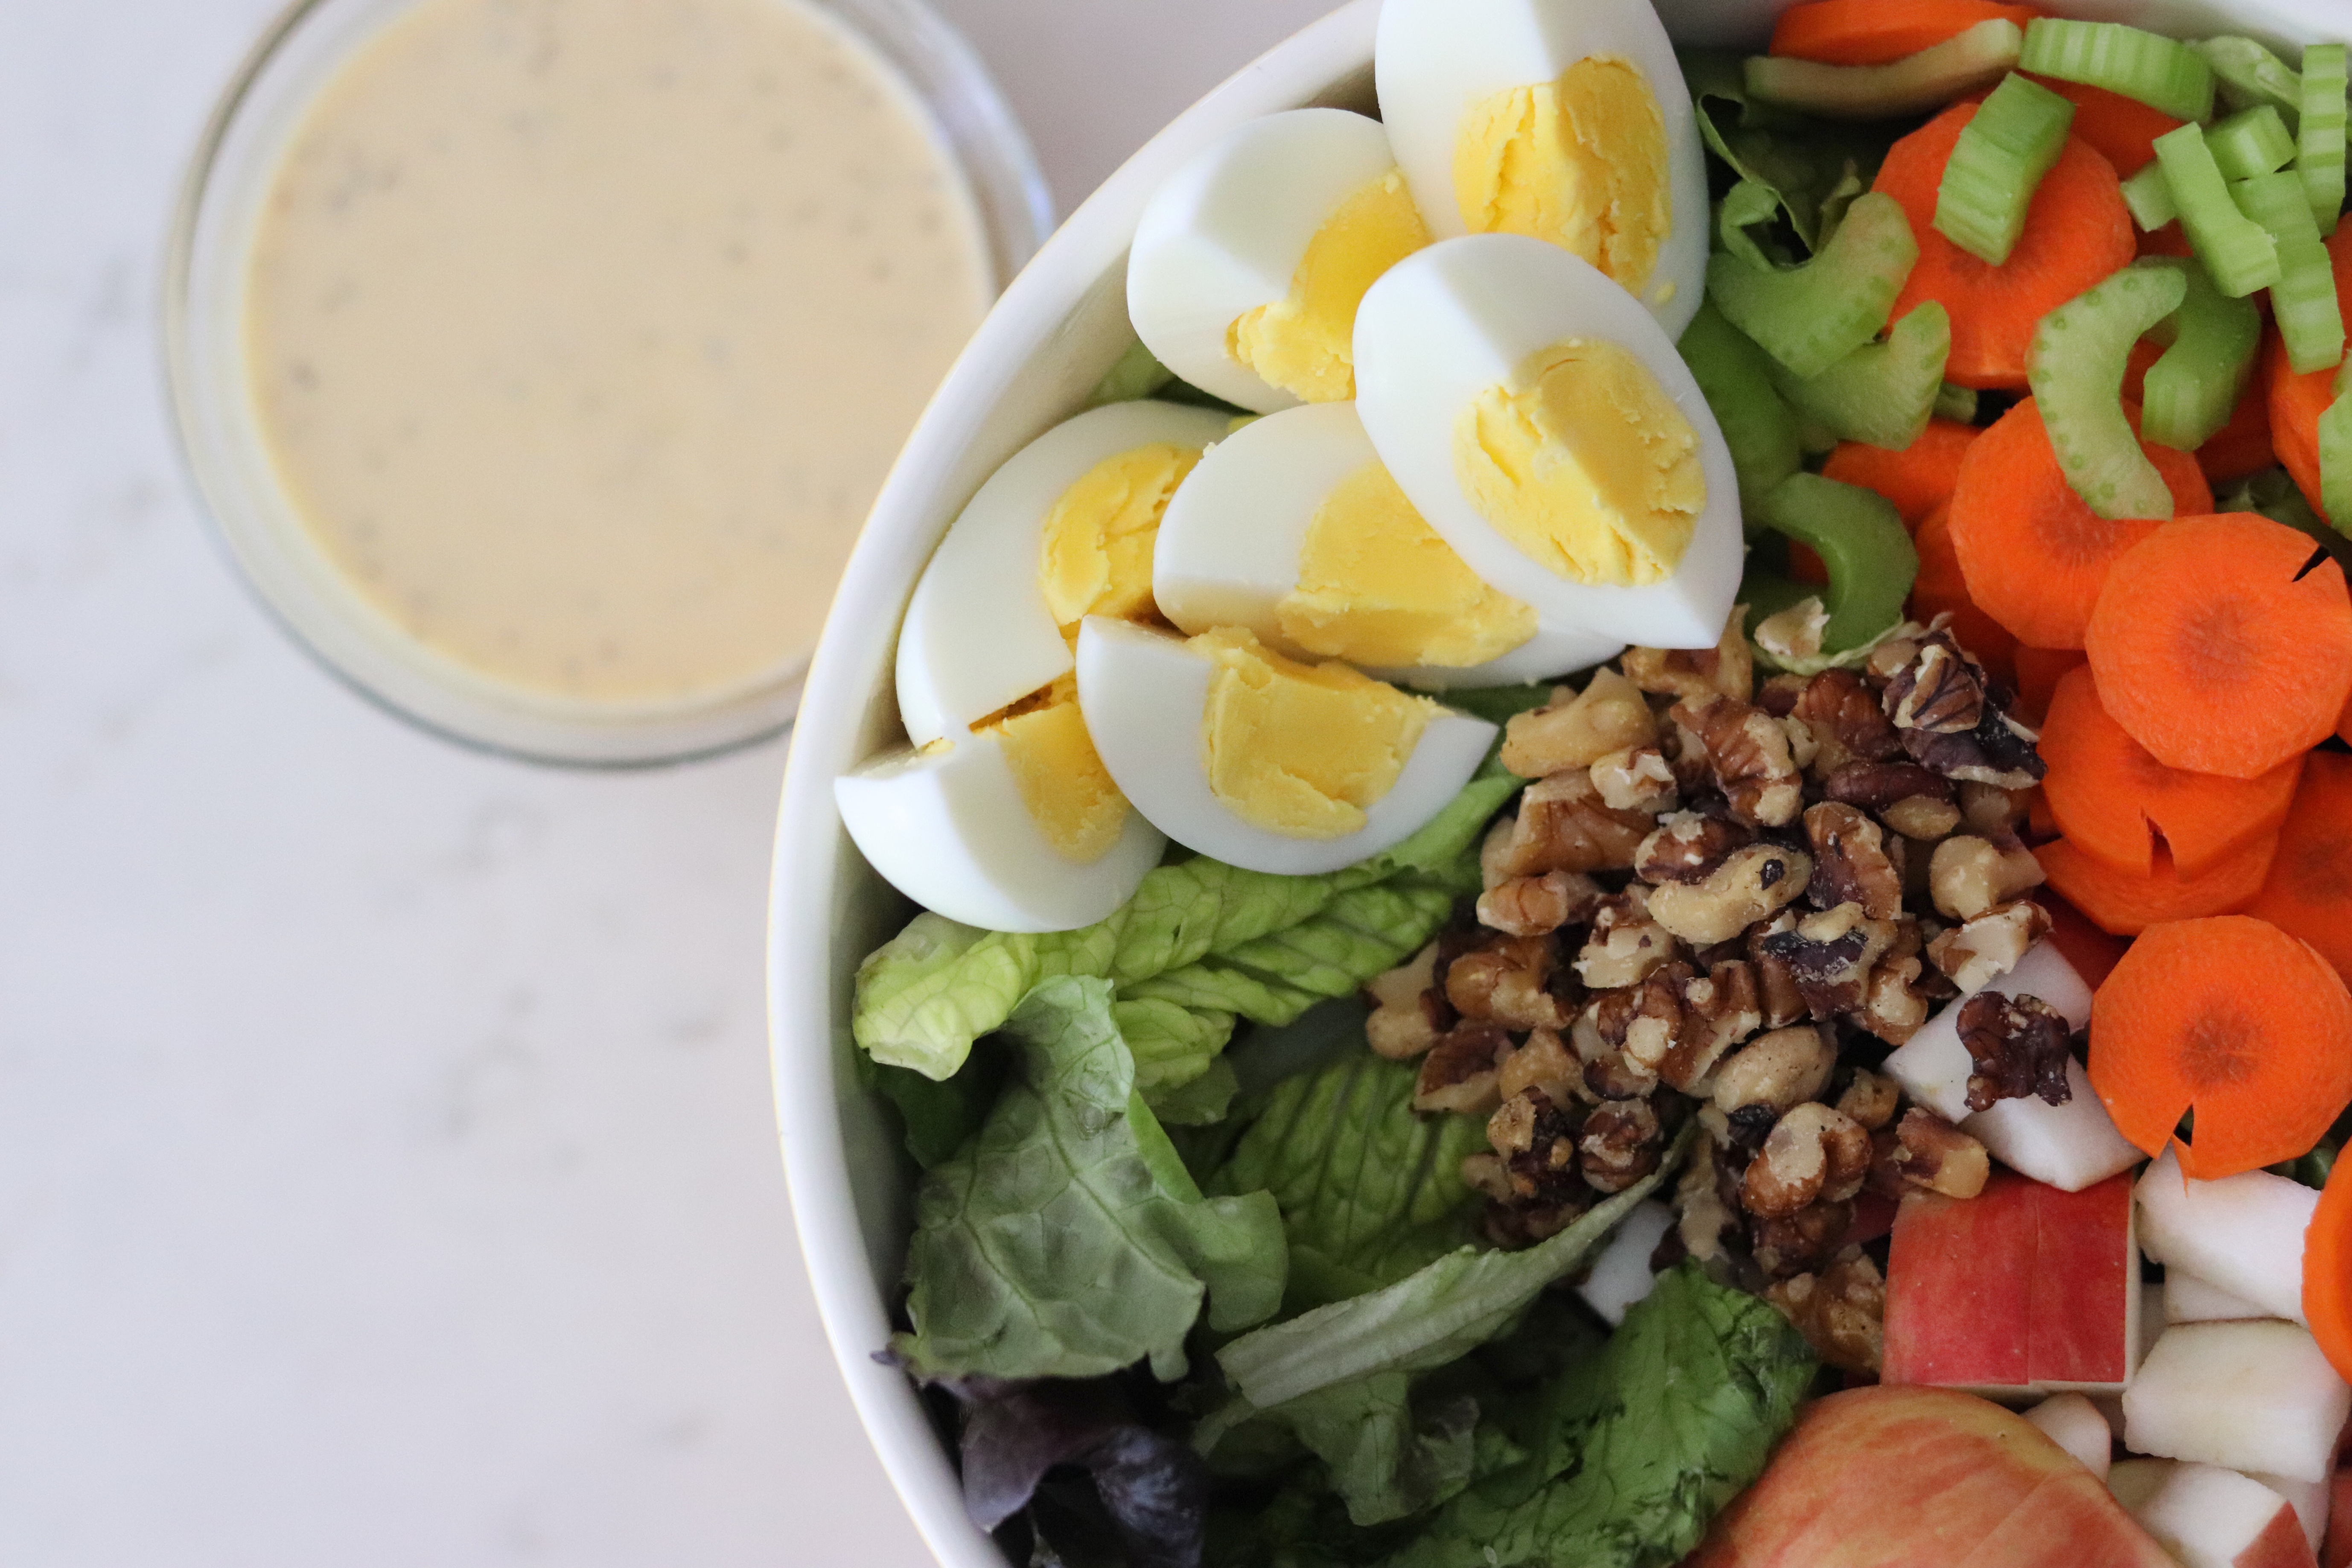 Bowl of Fall Salad with Boiled Egg and a bowl of Honey Mustard Dressing